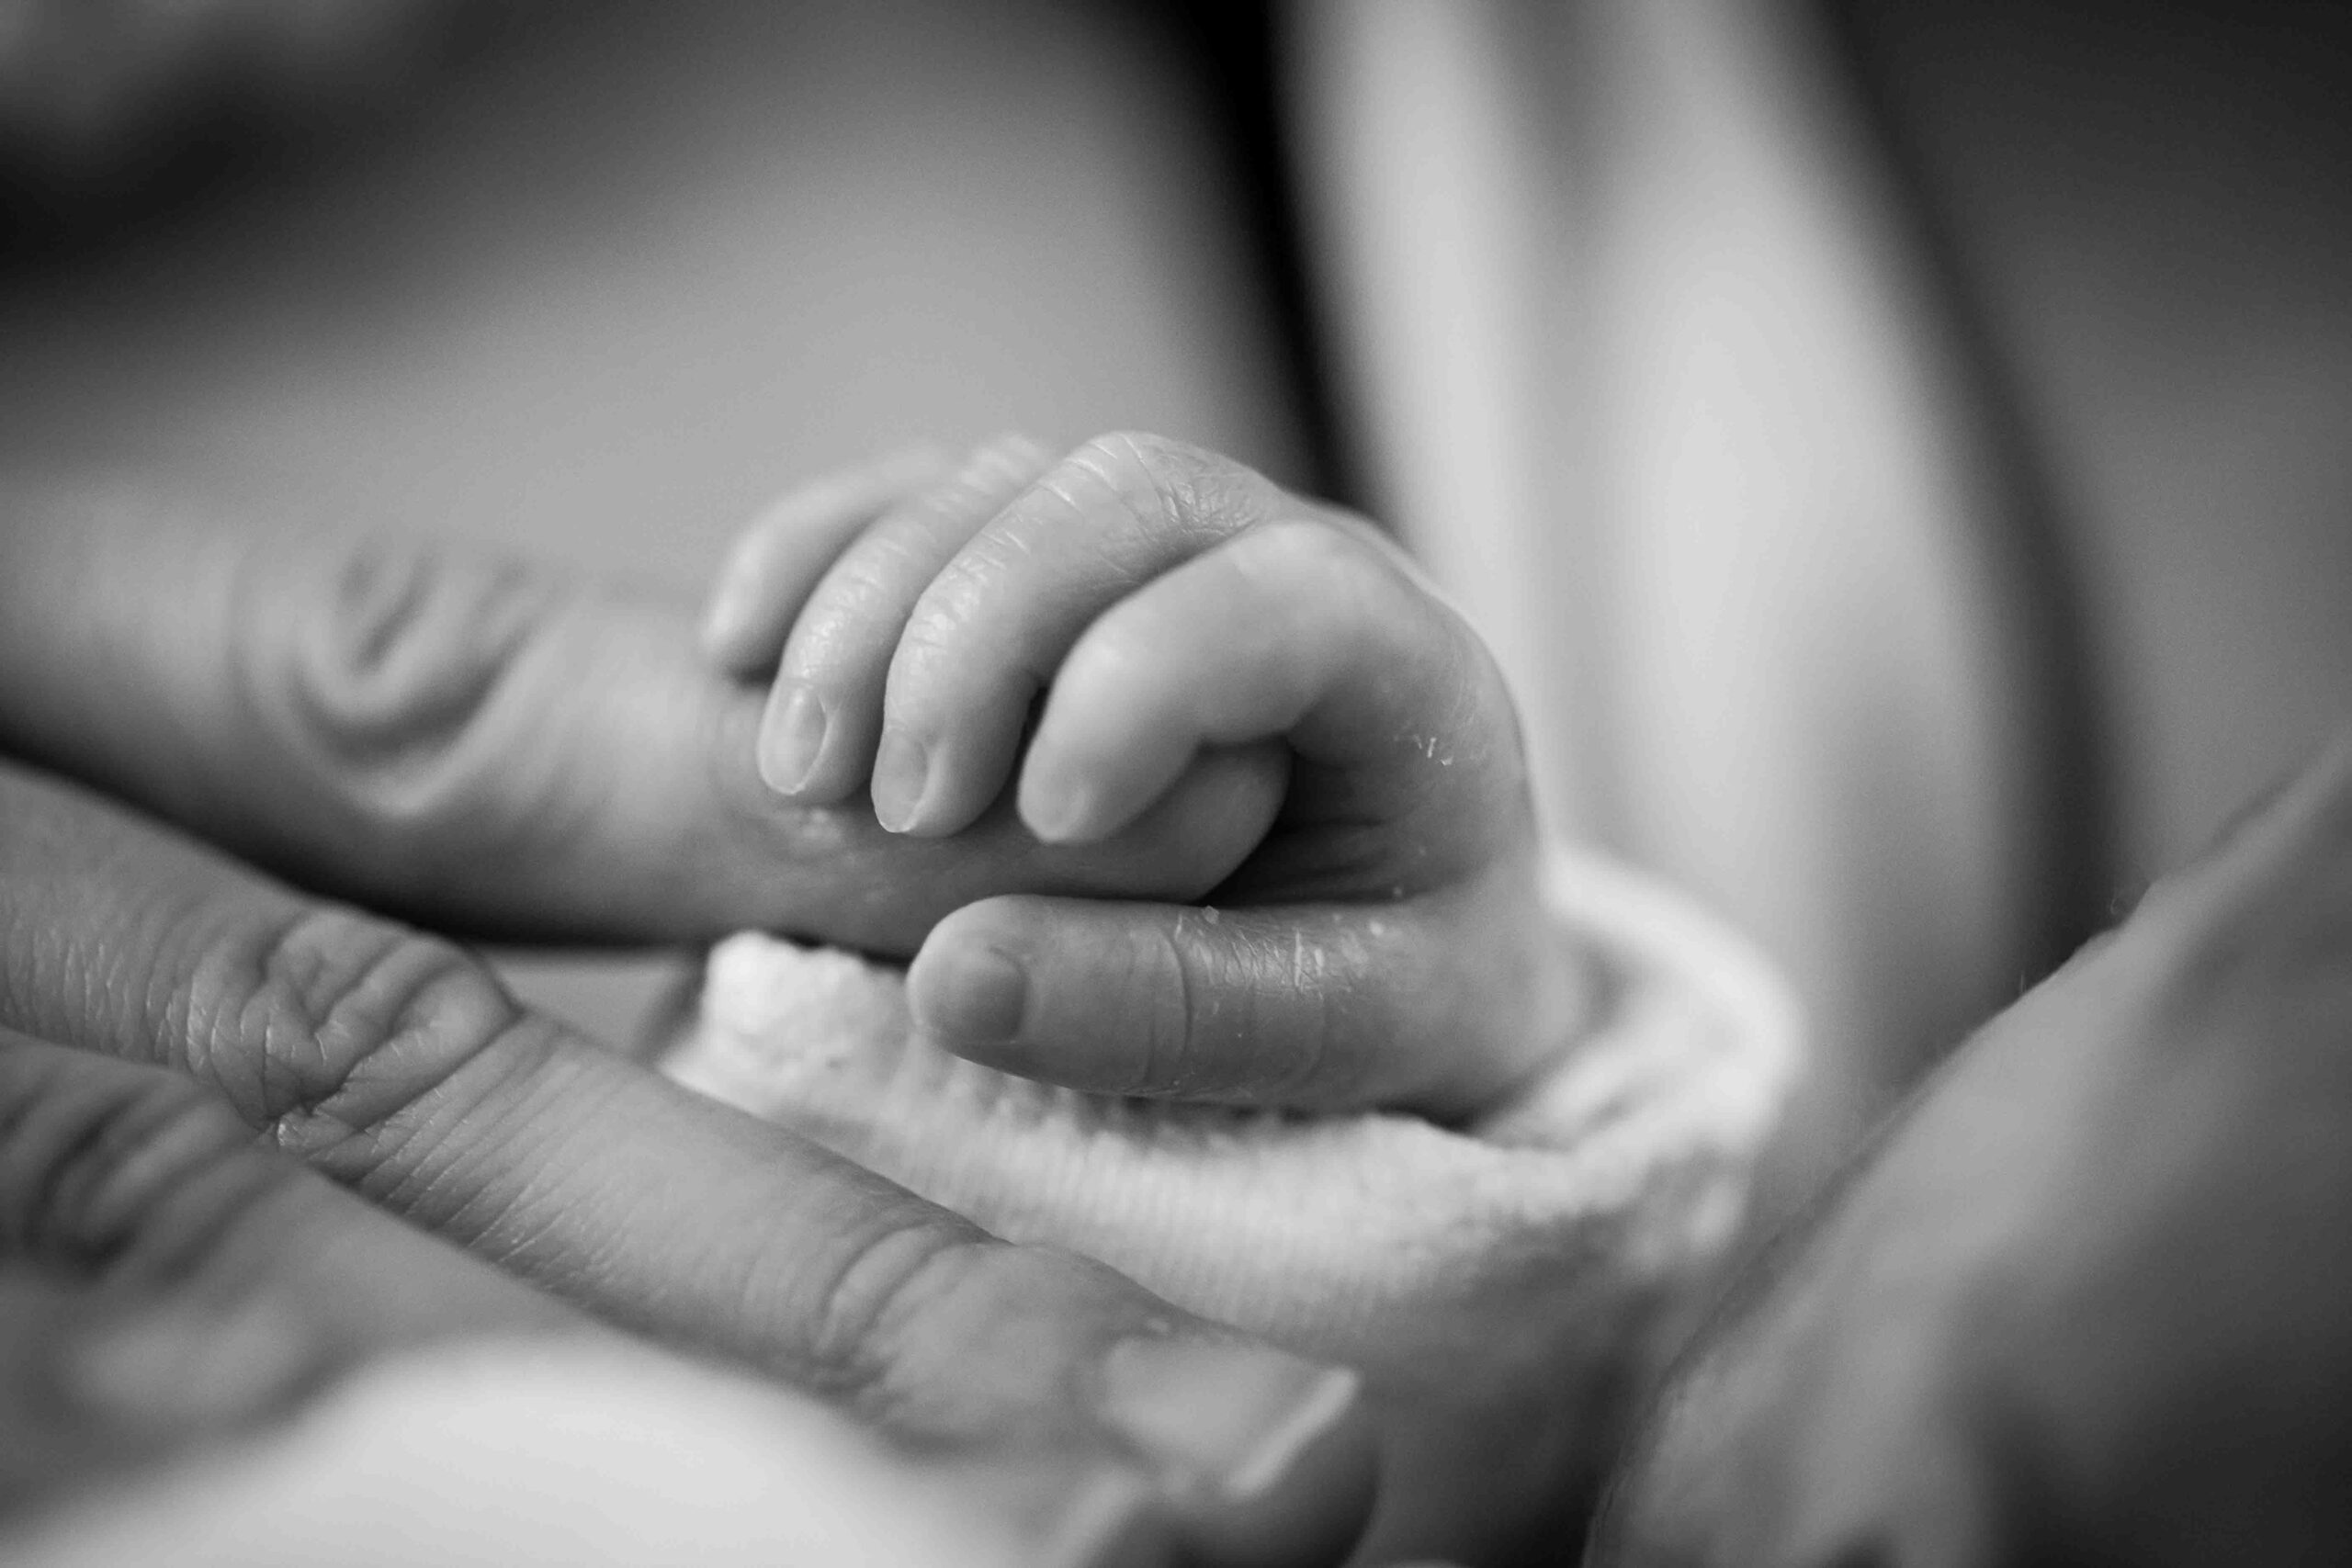 A baby’s hand holding an adult’s finger